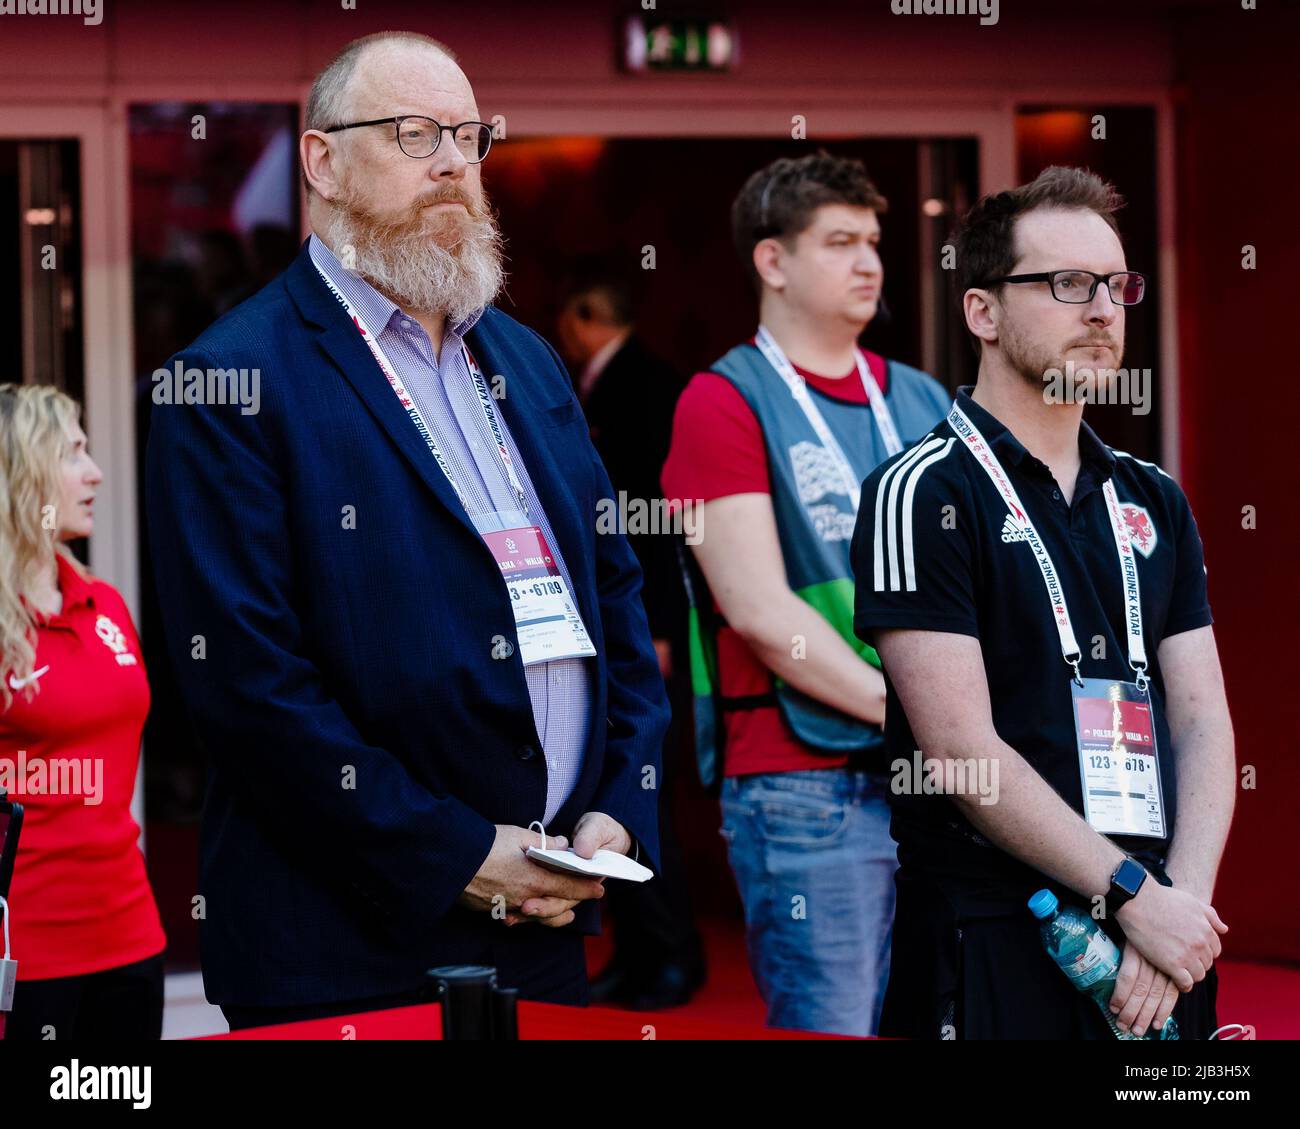 WROCŁAW, POLAND - 01 JUNE 2022: Wales’ Head of International Affairs Mark Evans and Wales’ Media Officer Owain Harries during the League A 2022 Nations League fixture between Poland & Wales at the Tarczynski Arena, Wrocław, Poland on the 1st of June, 2022. (Pic by John Smith/FAW) Stock Photo